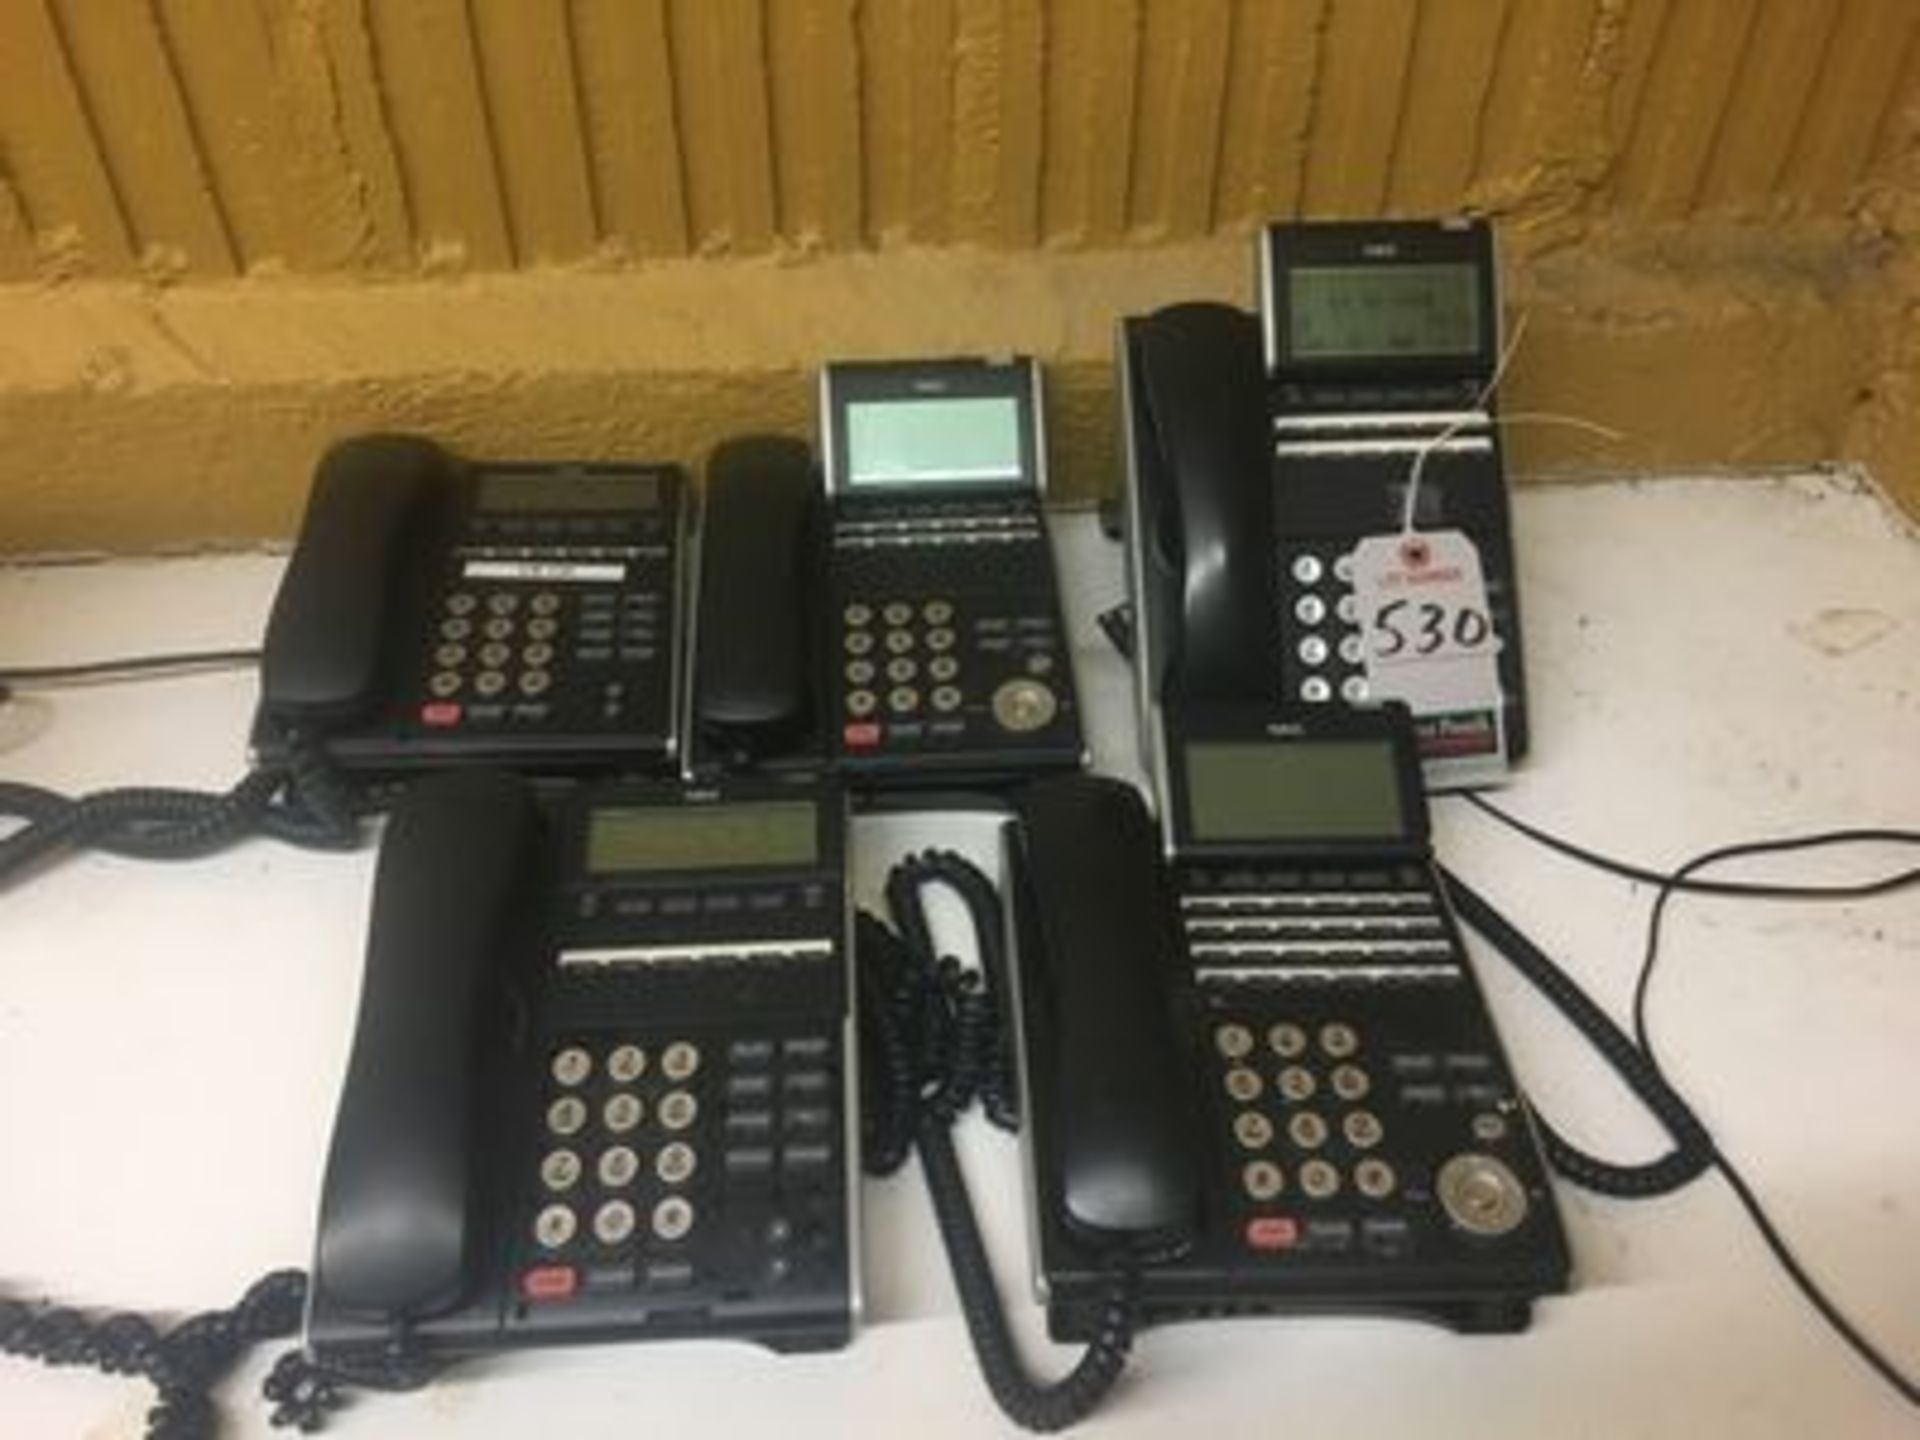 NEC PHONE SYS. W/ (10) HANDSETS, VOICEMAIL & CALL WAITING, M/N SV8300